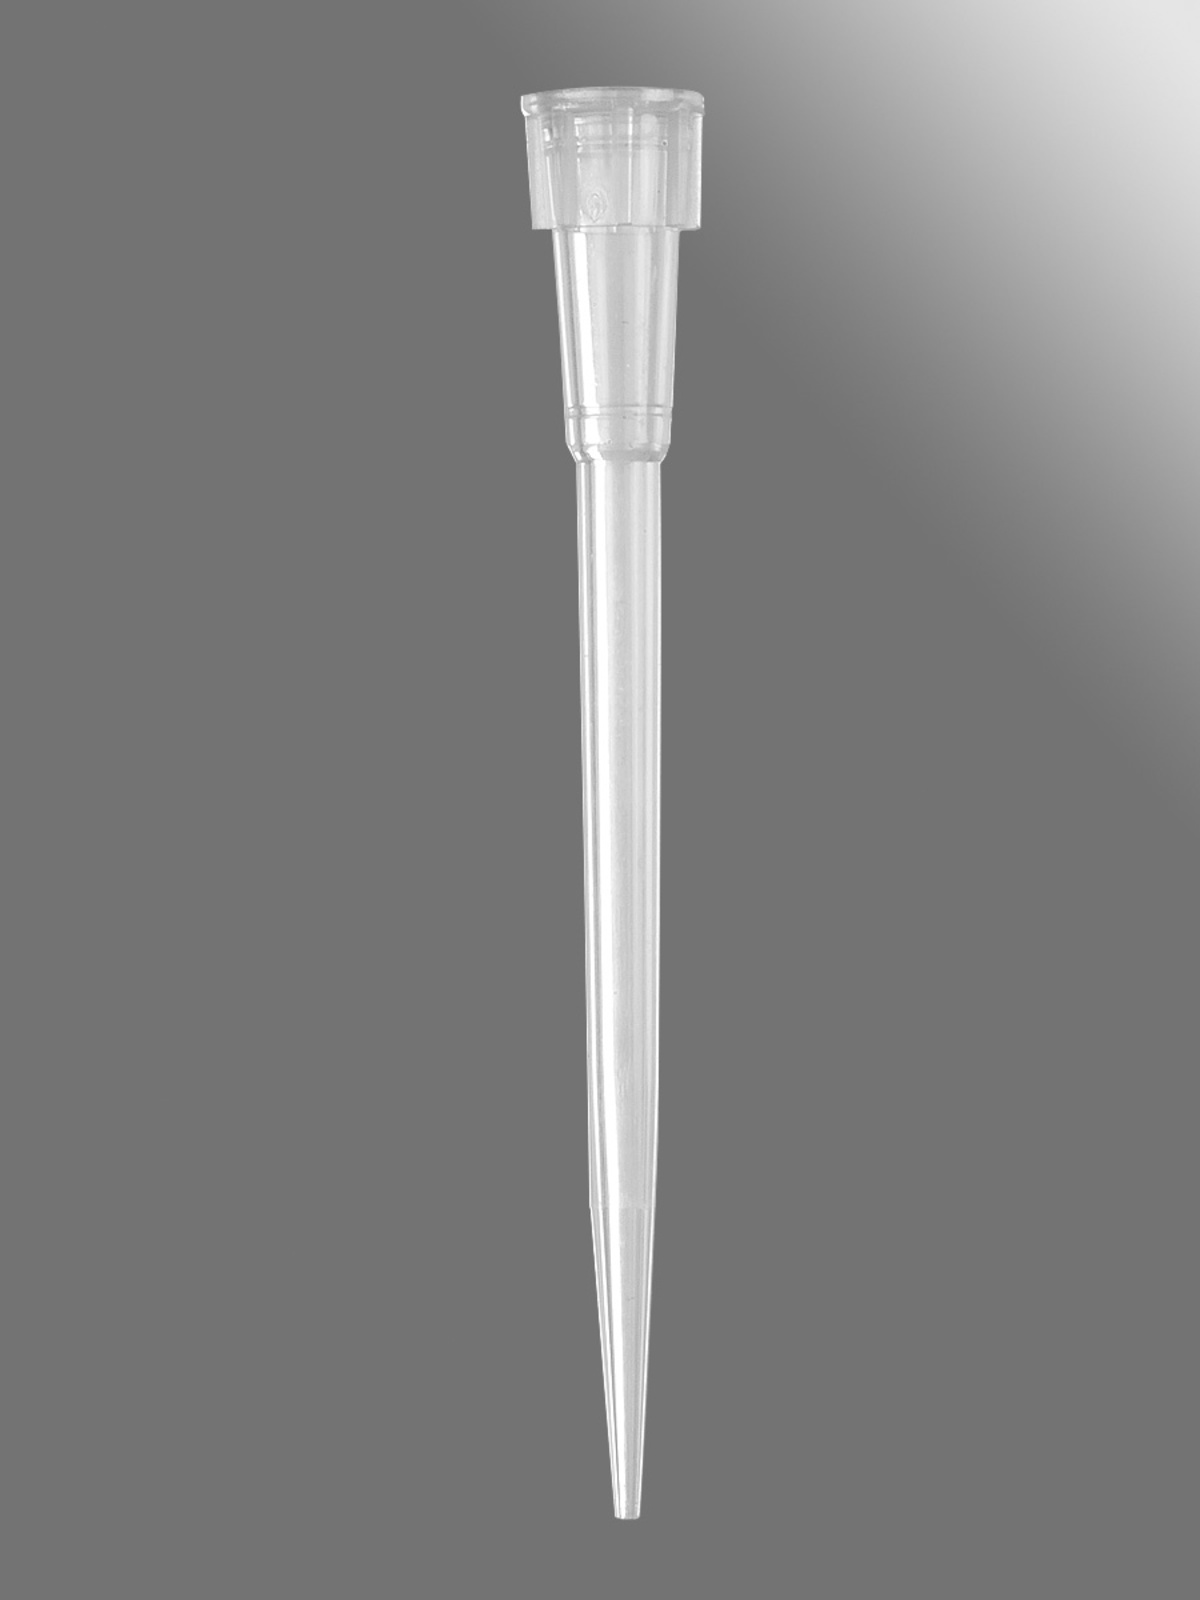 0.5-10ul Ultra Micro Extra Long Clear Pipet Tips for Pipetman P2/P10 and Eppendorf Research/Referenc